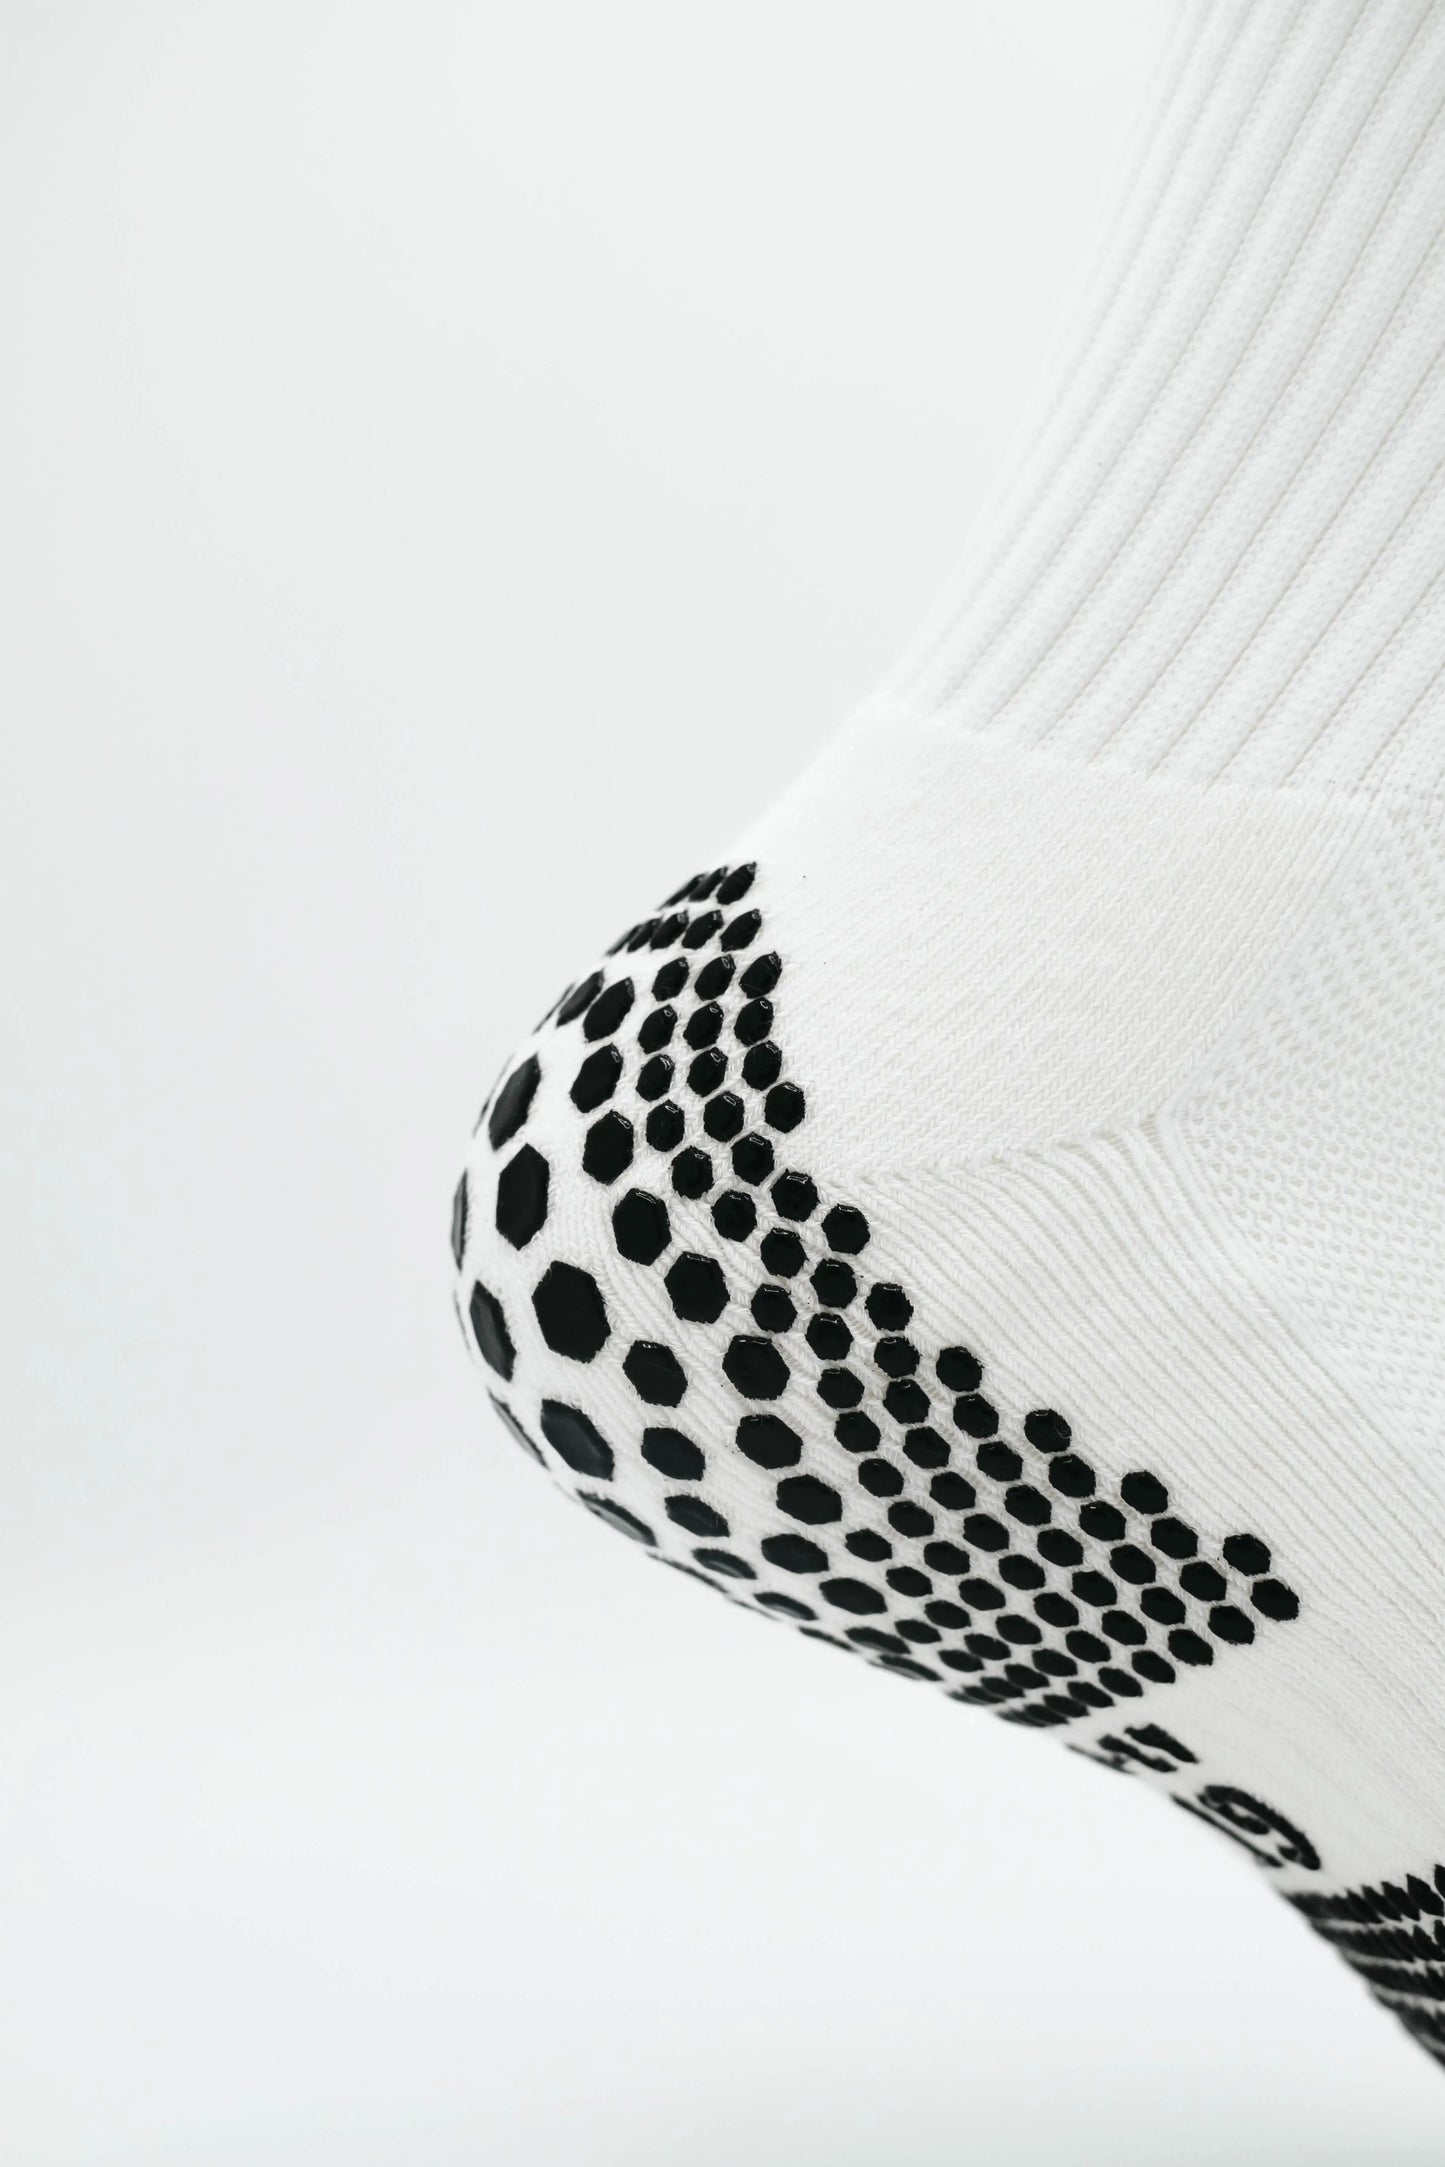 GT GRIP Socks White Heel Grip, Silicone Pattern for Heel and Achilles Protection